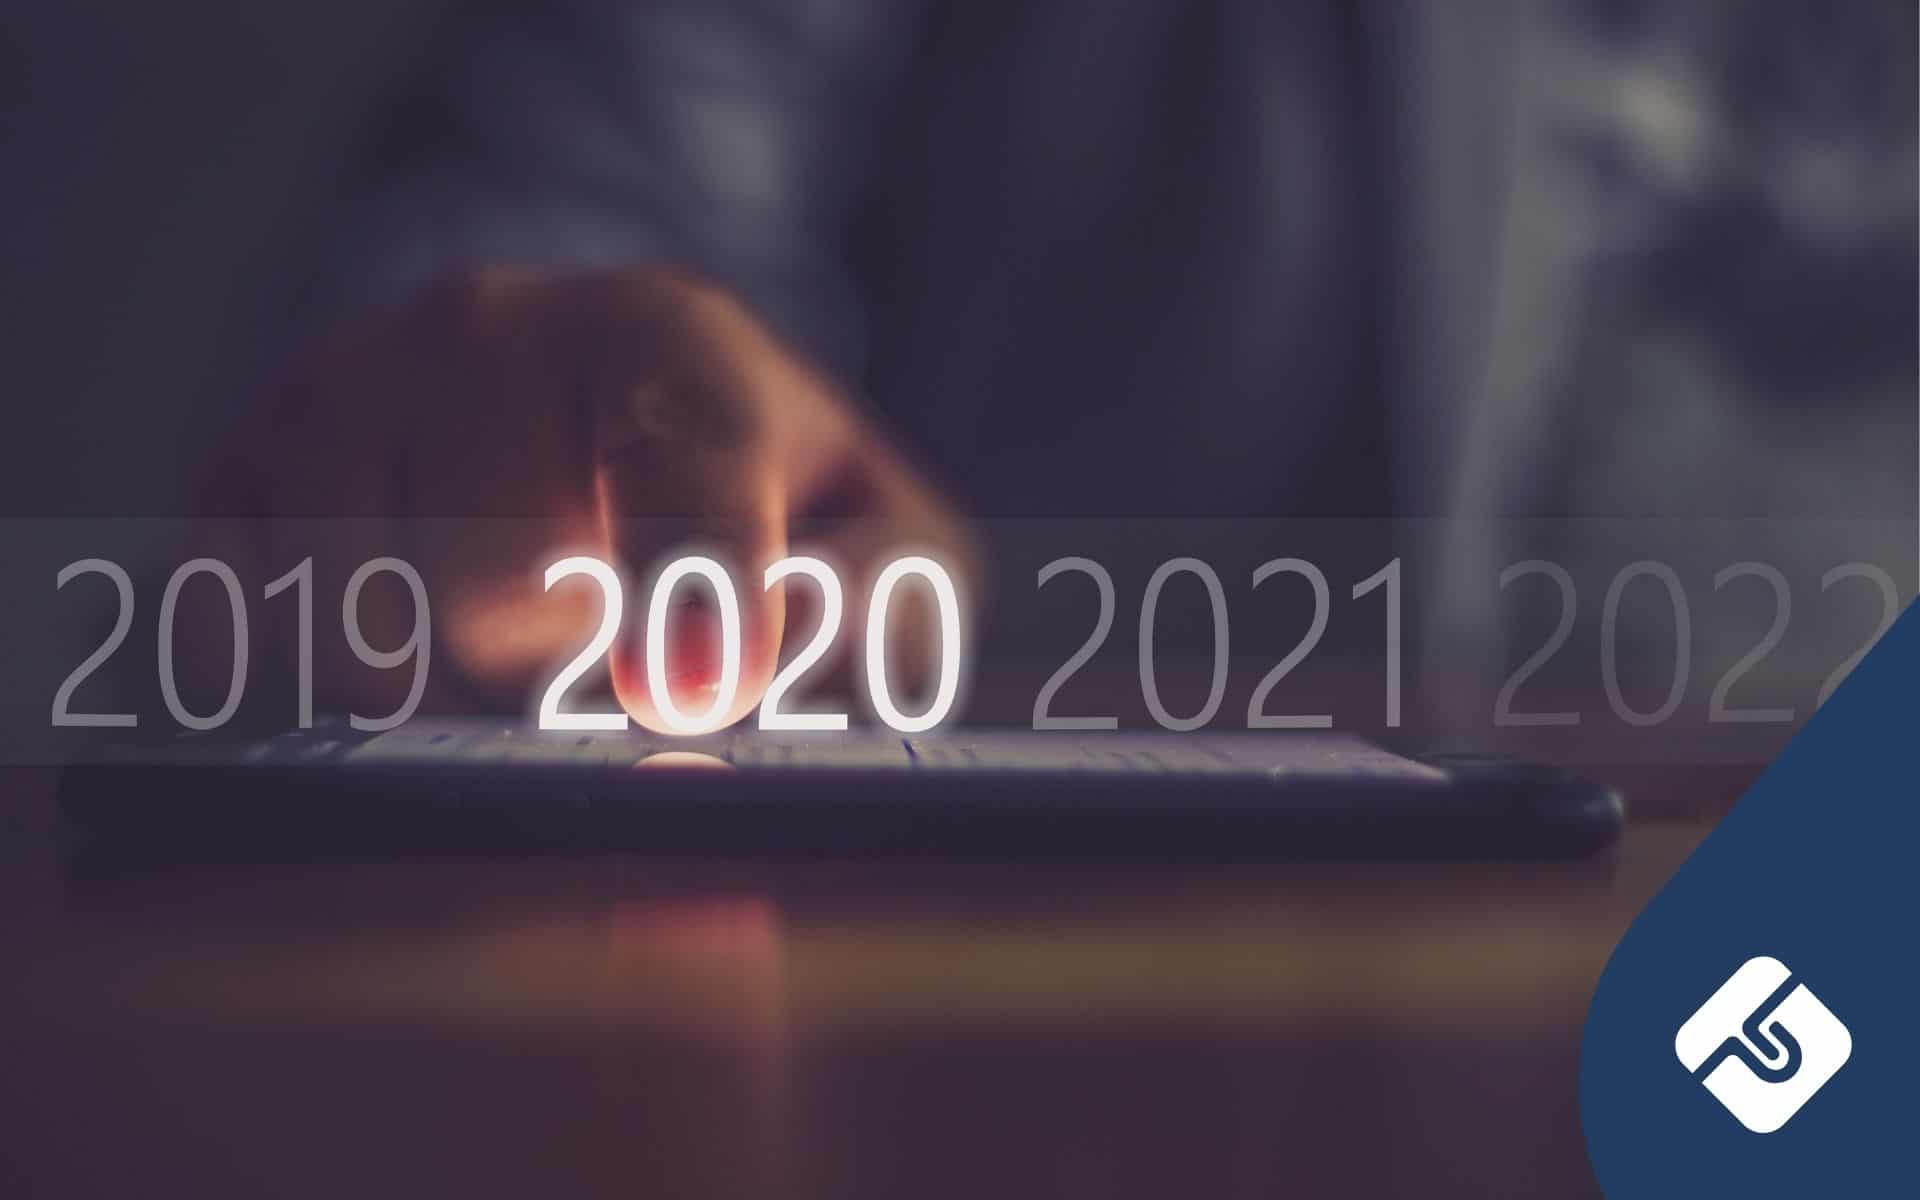 How Businesses Adapted in 2020